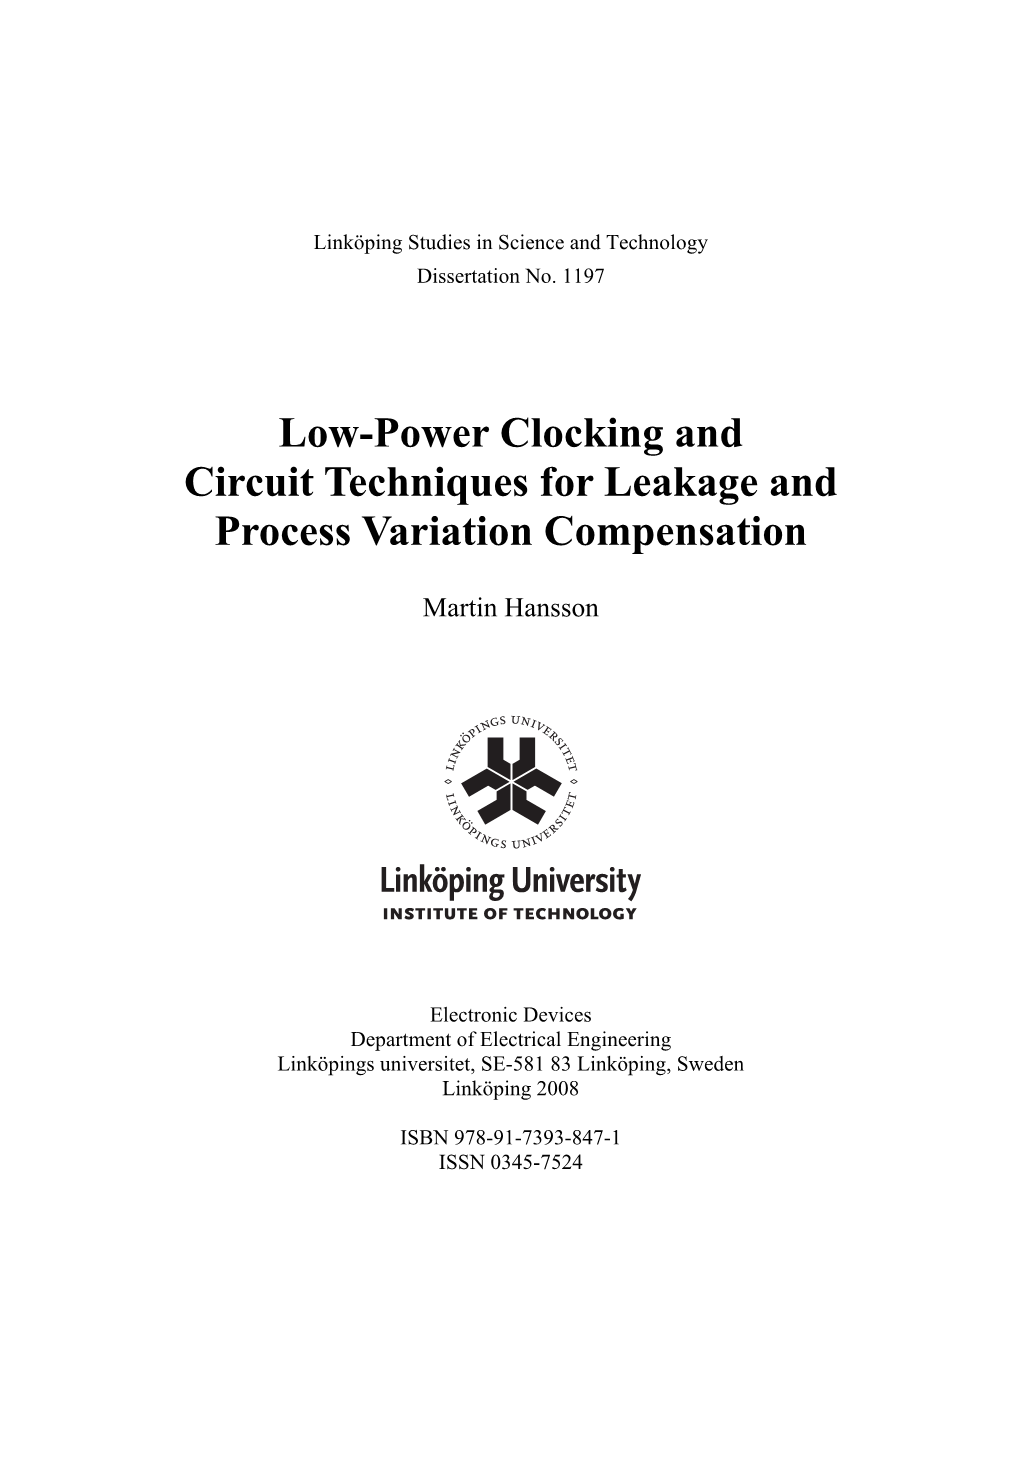 Low-Power Clocking and Circuit Techniques for Leakage and Process Variation Compensation